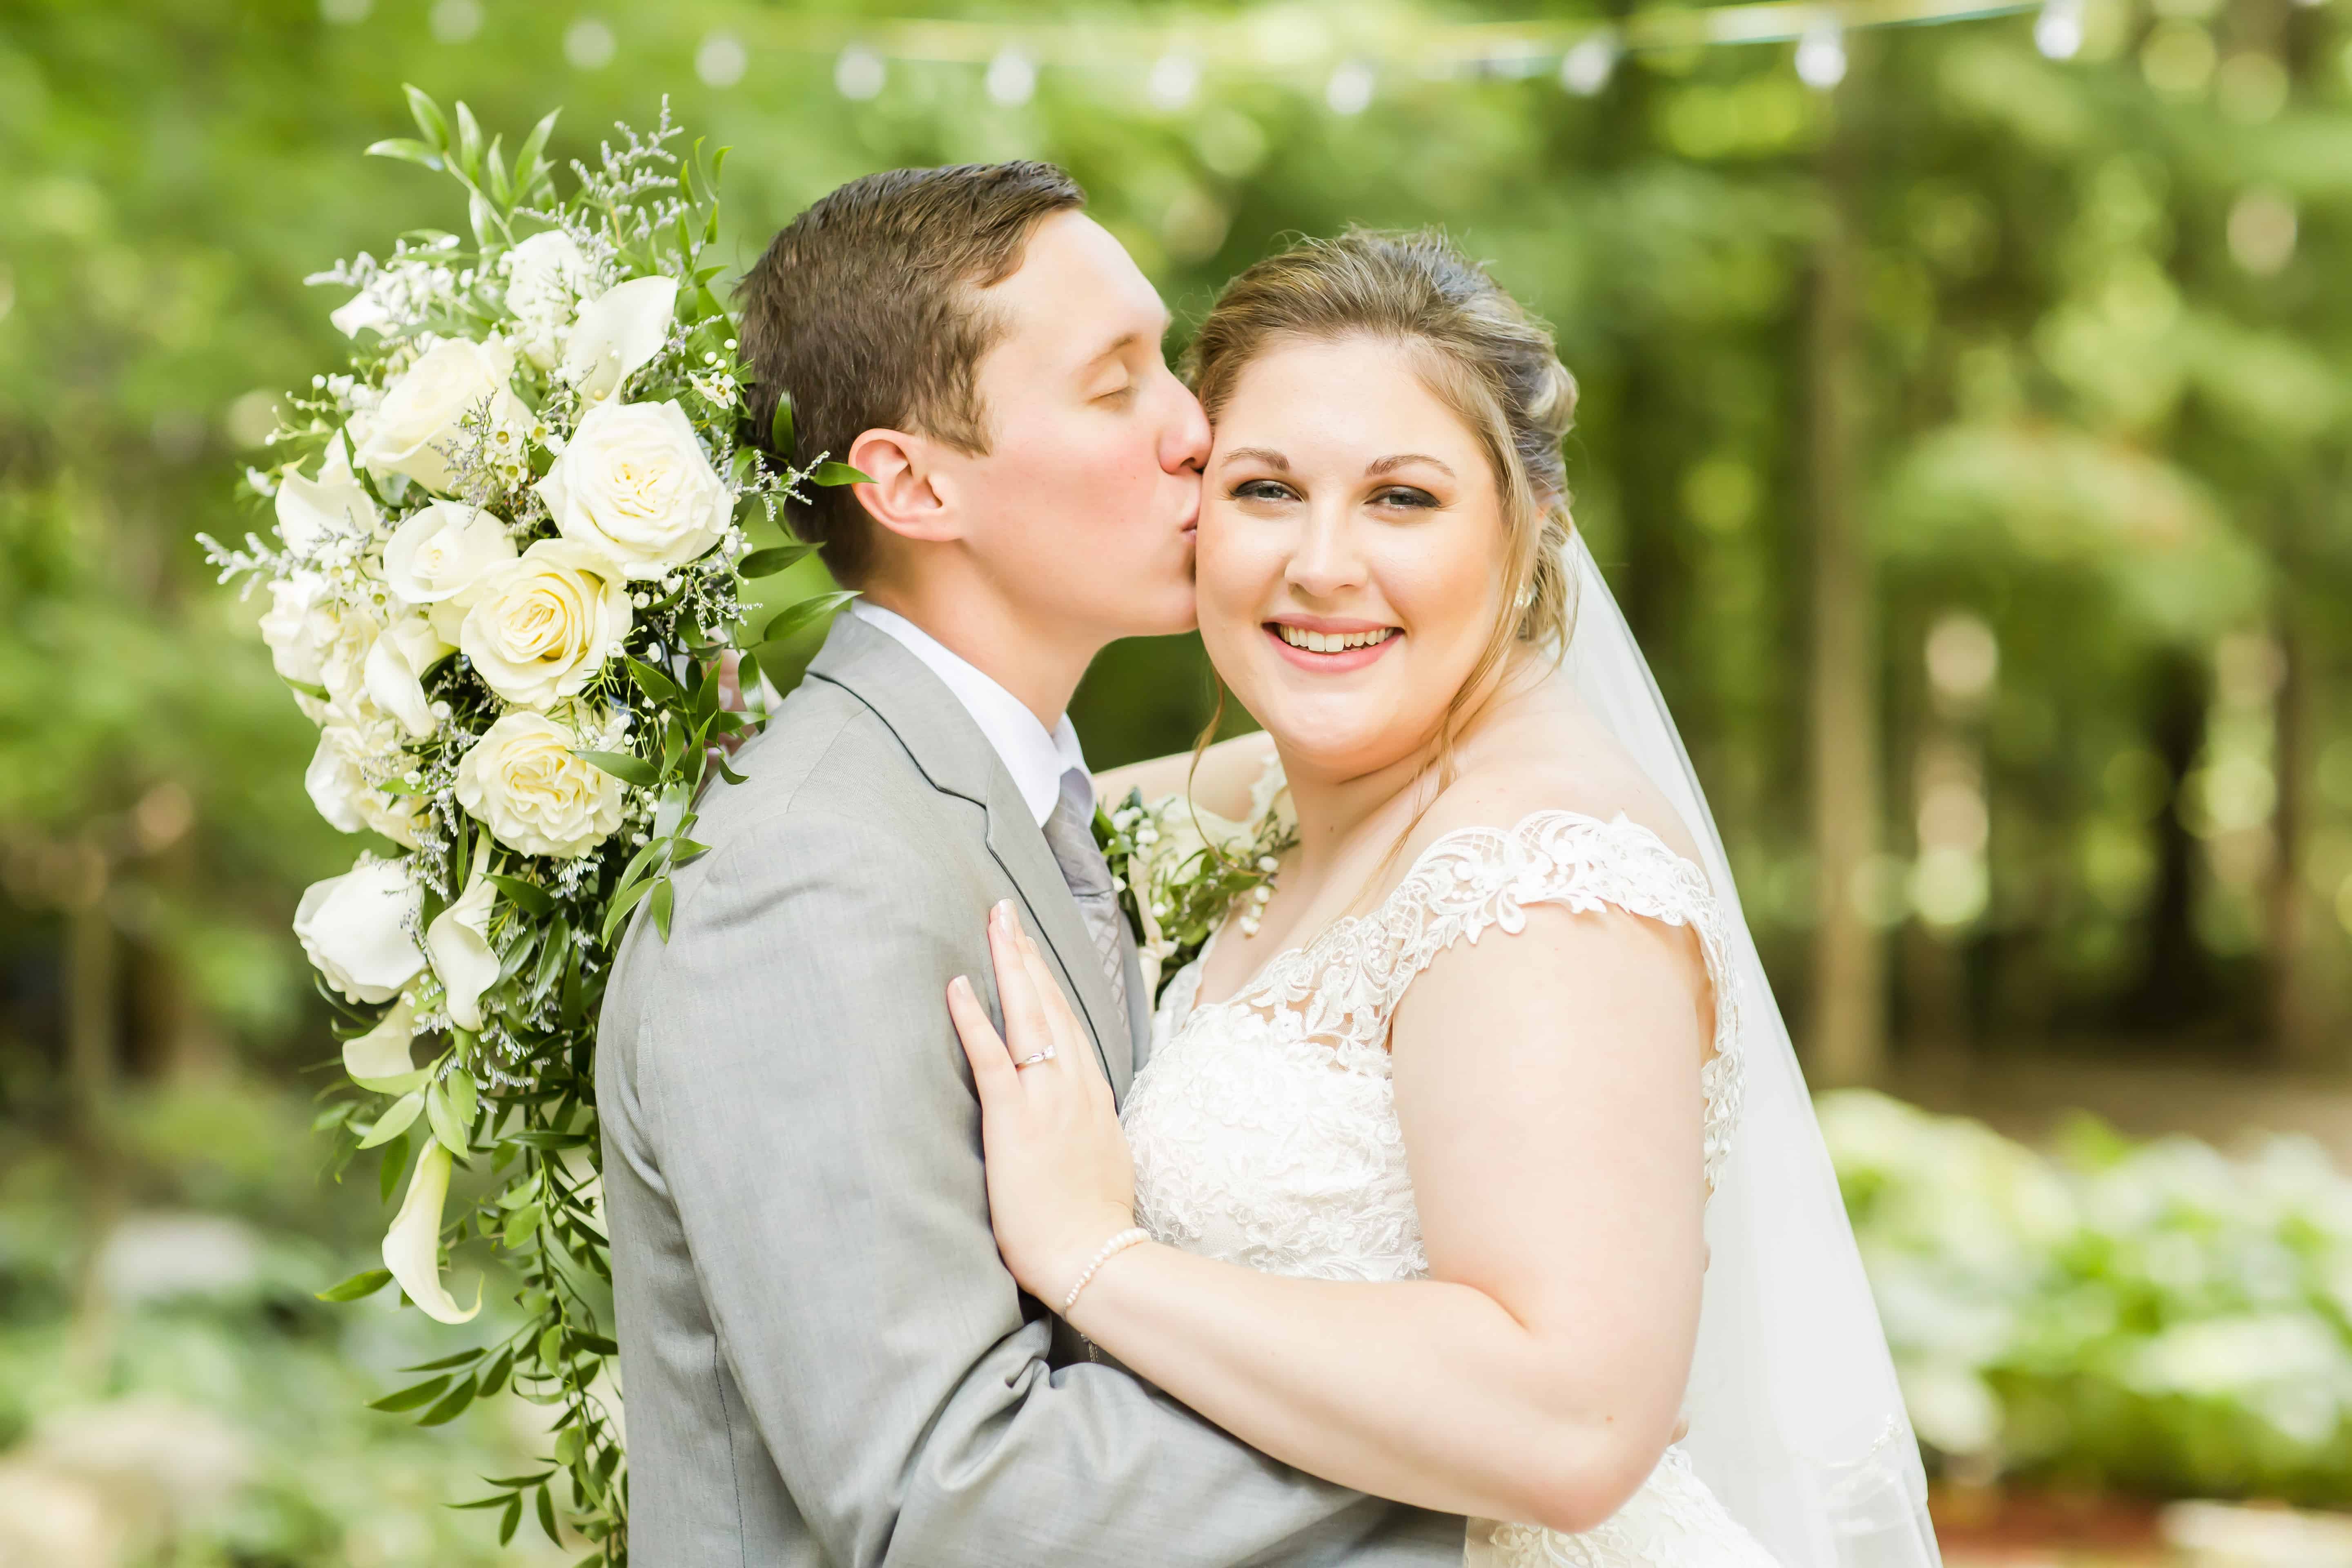 Groom kissing bride on temple at their In the Woods Wedding photographed by Akron Ohio Wedding Photographer